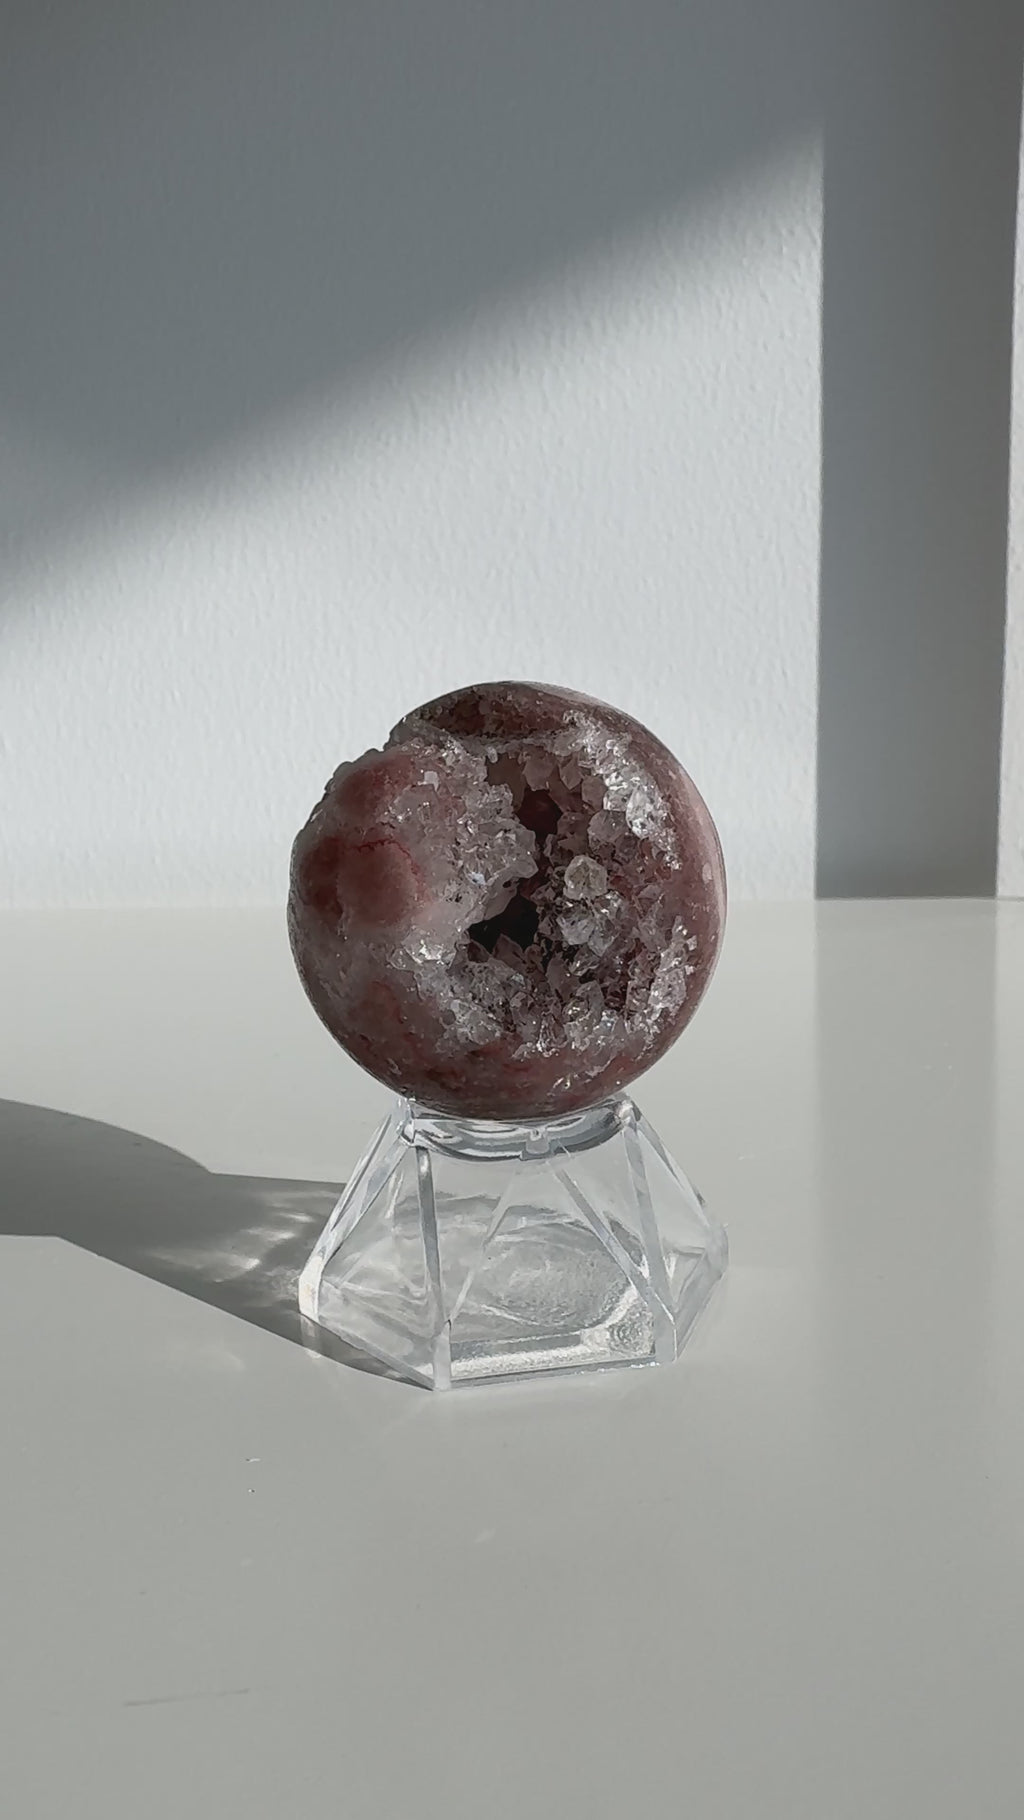 Video of a mini amethyst sphere with deep pink colouring 